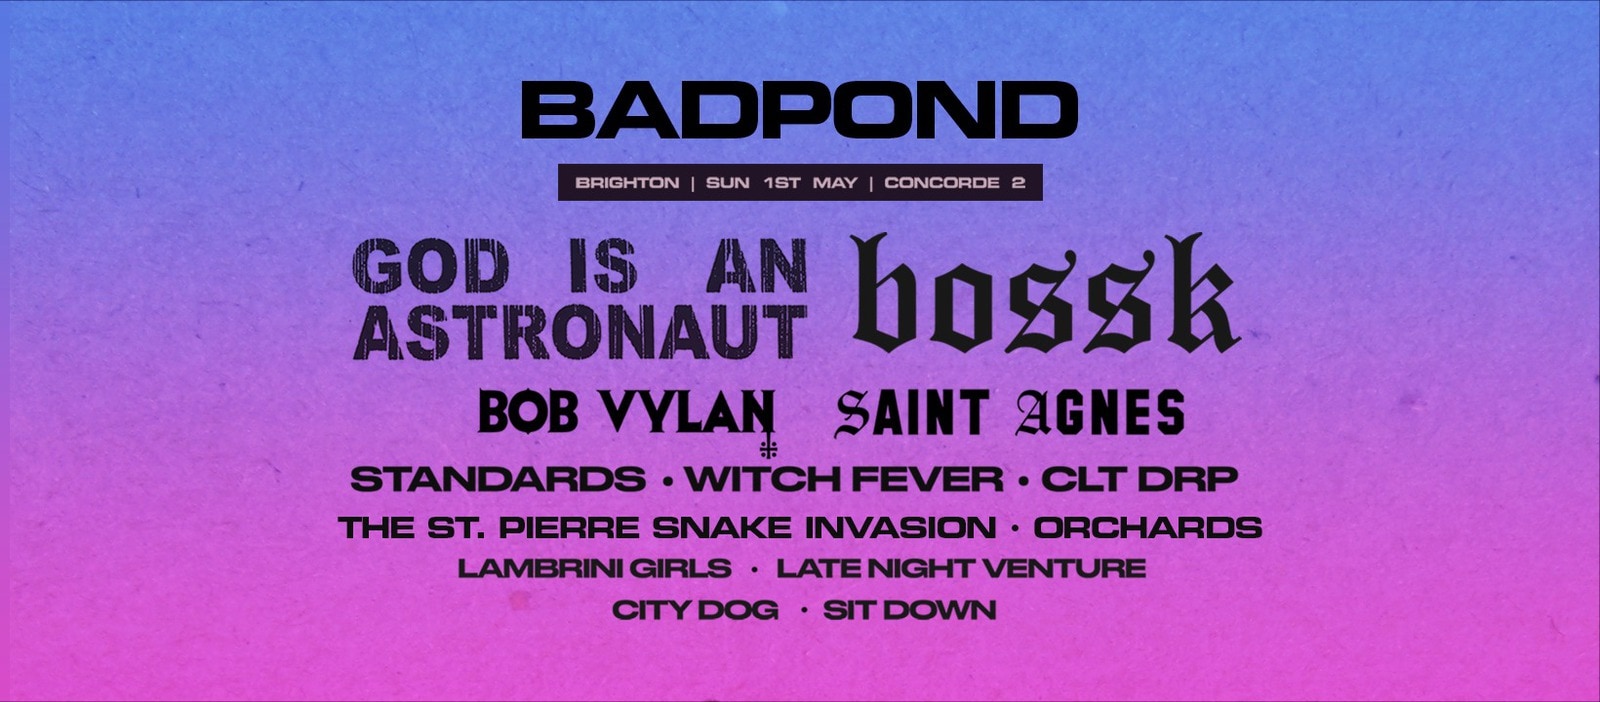 Bad Pond Festival 1st May 2022